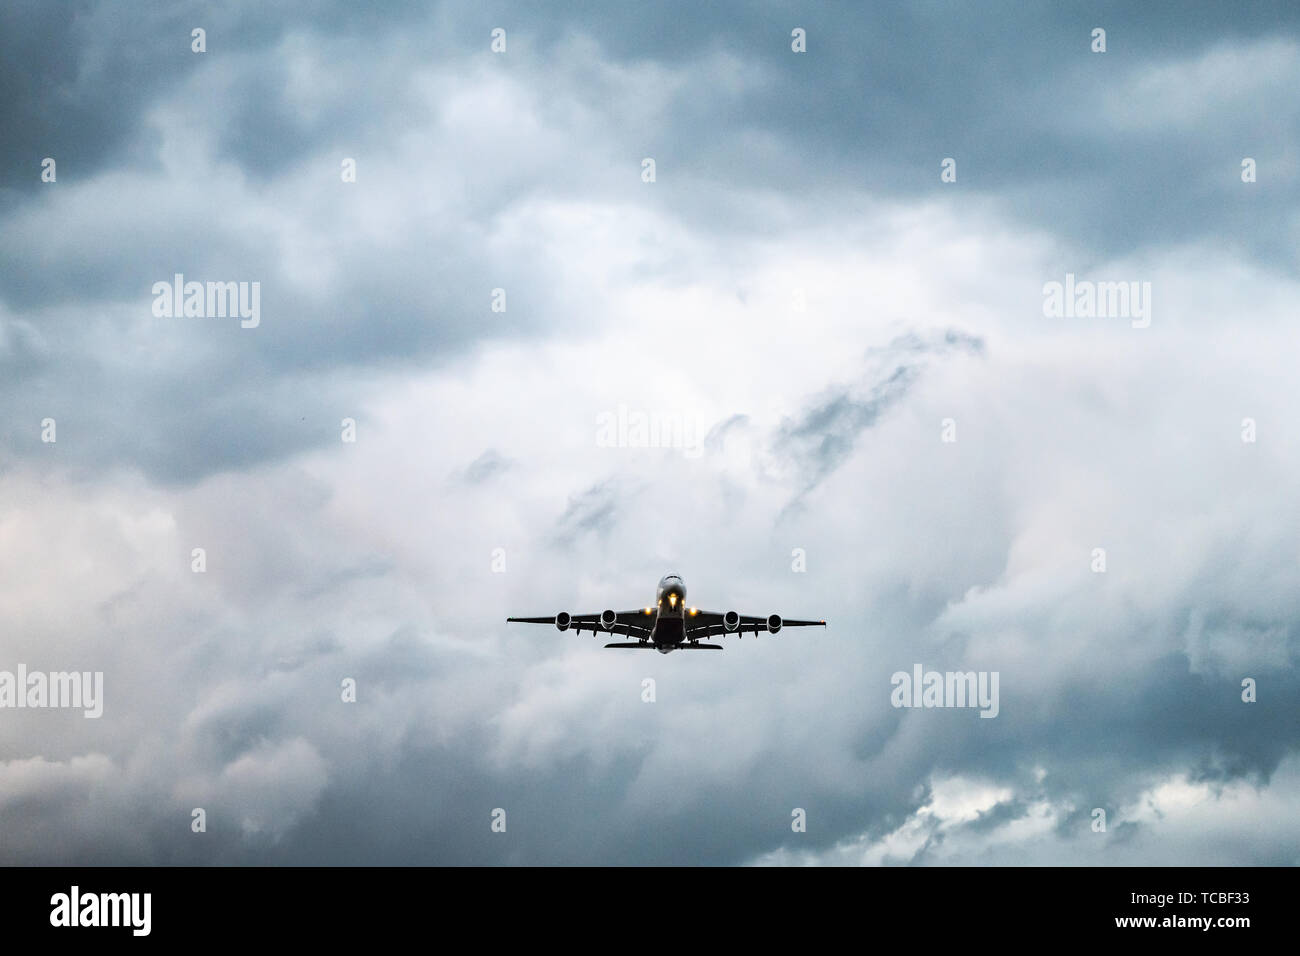 plane takes off from the airport in the night with dark cloudy sky. Stock Photo